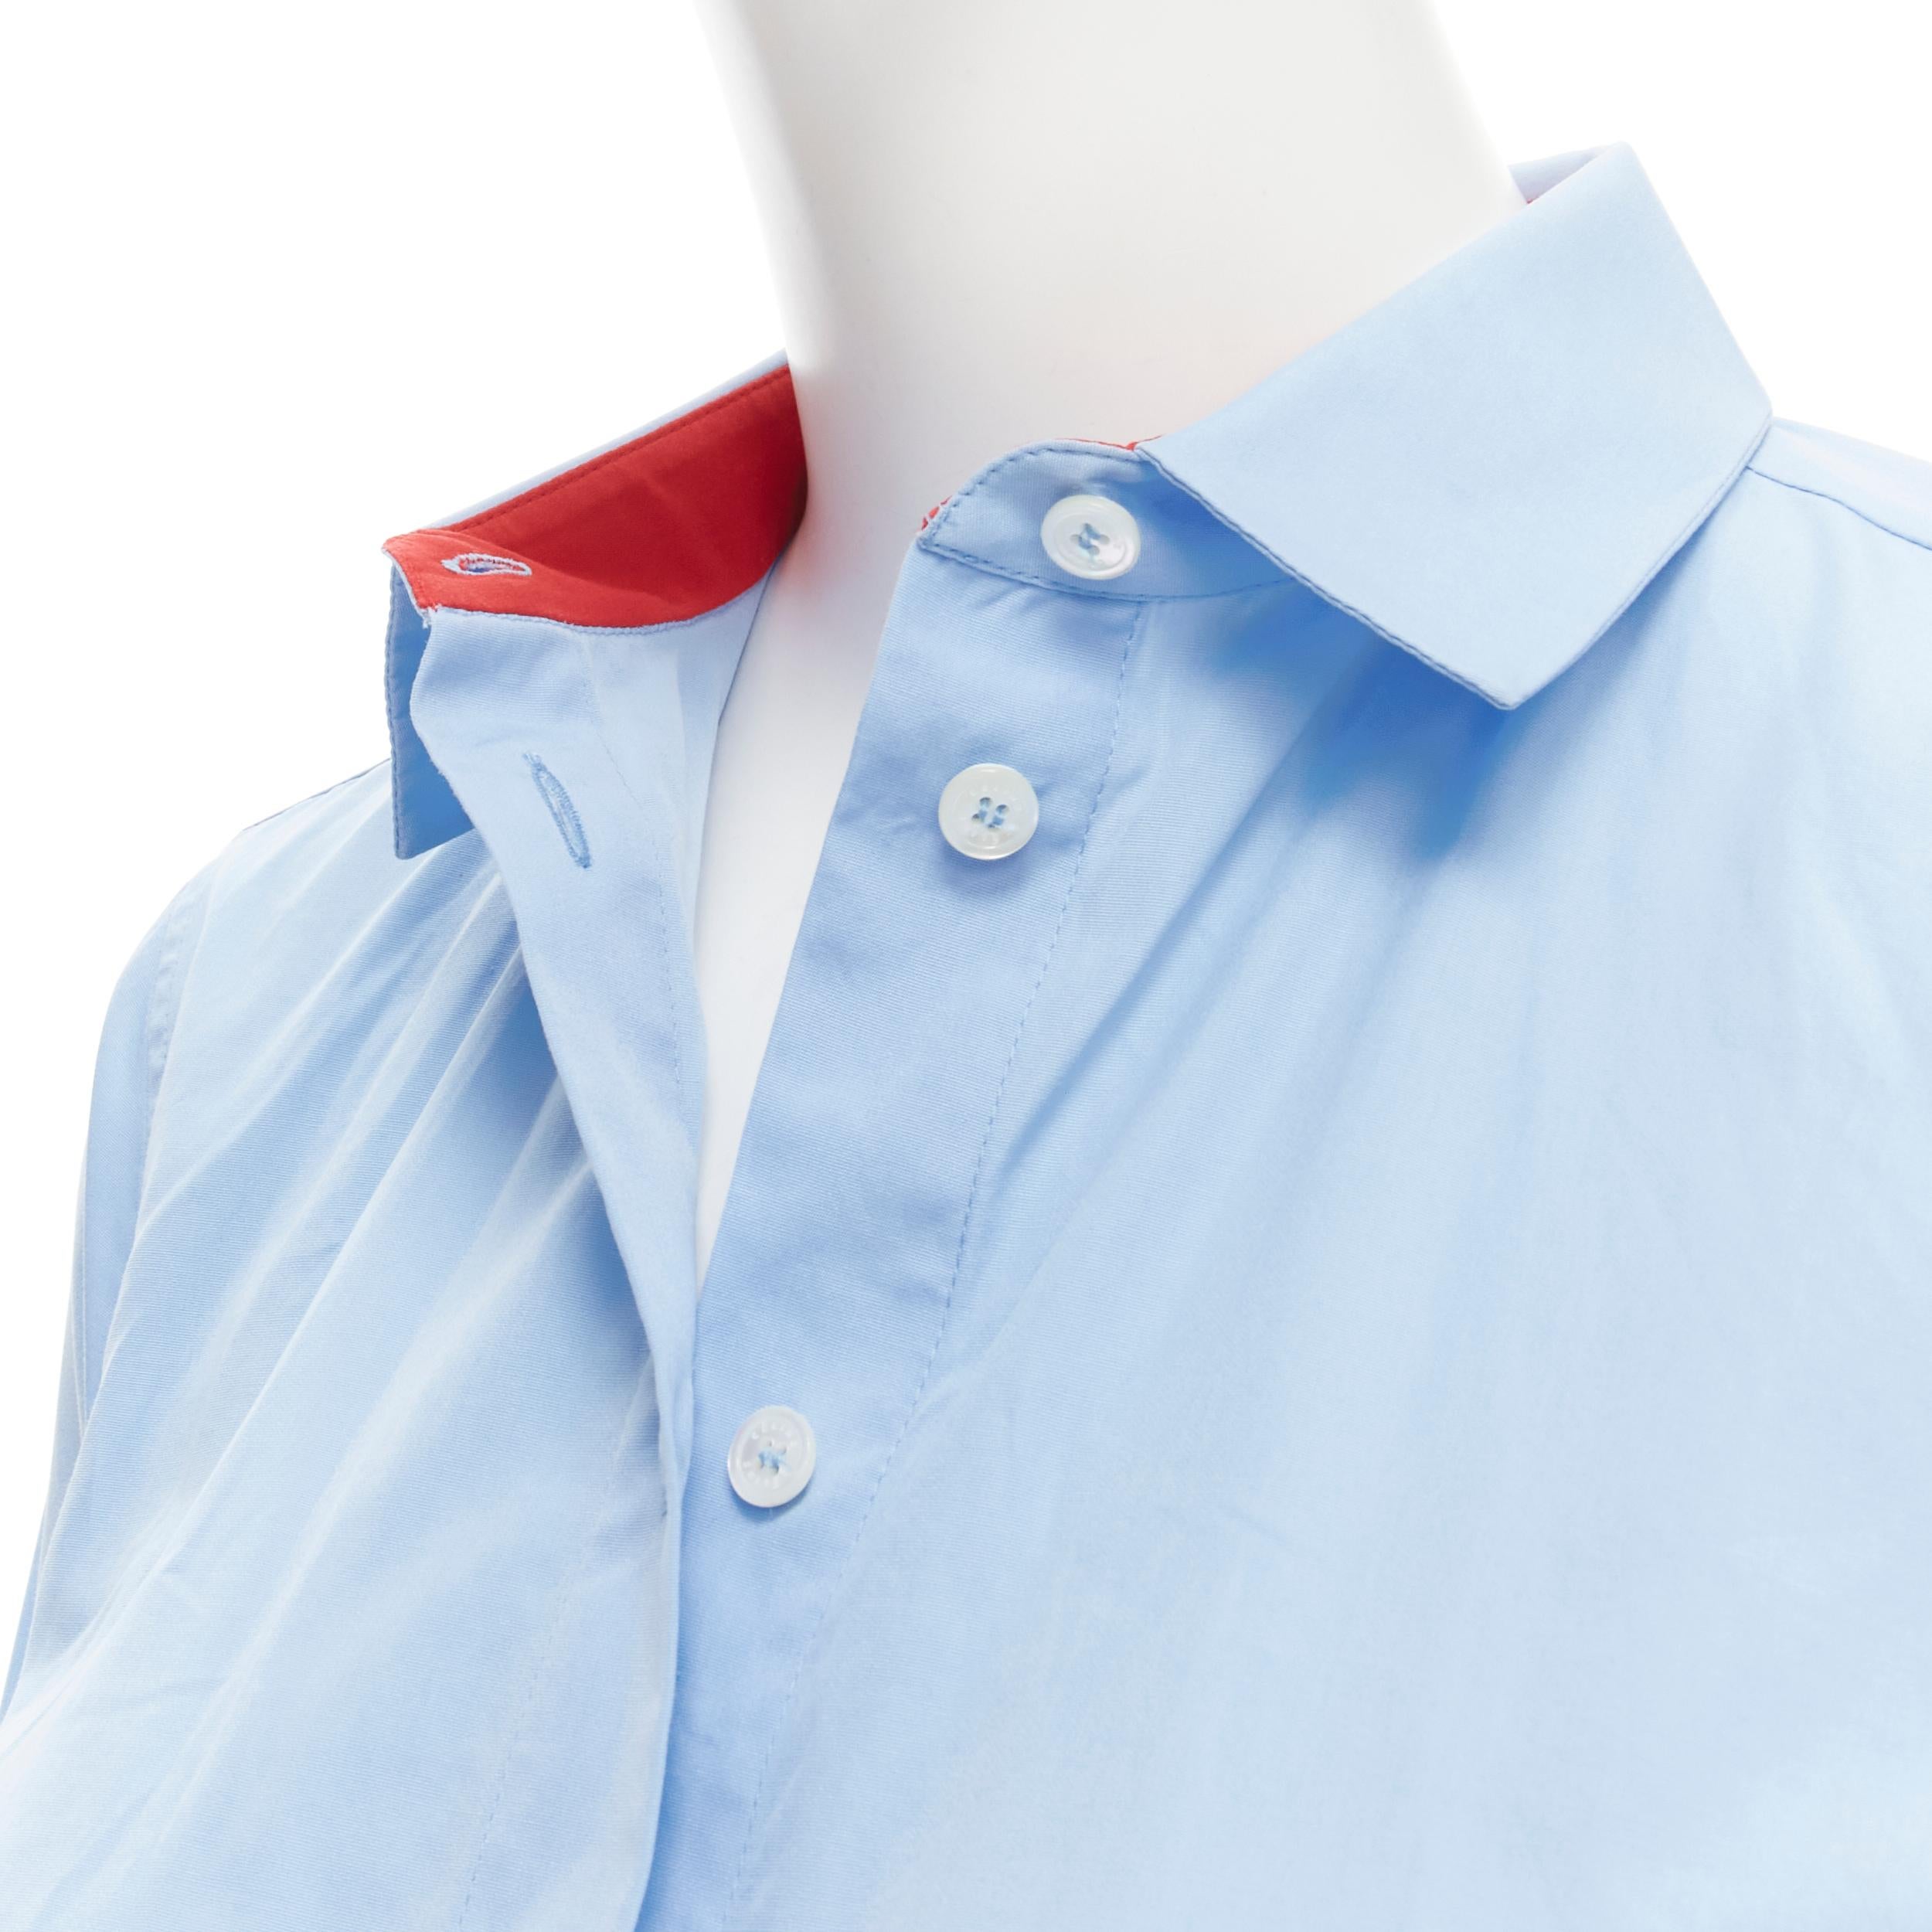 OLD CELINE Phoebe Philo blue red lined collar slim fit shirt FR36 XS 
Reference: MELK/A00131 
Brand: Celine 
Designer: Phoebe Philo 
Material: Cotton 
Color: Blue 
Pattern: Solid 
Closure: Button 
Extra Detail: Red trimming at collar lining. 
Made